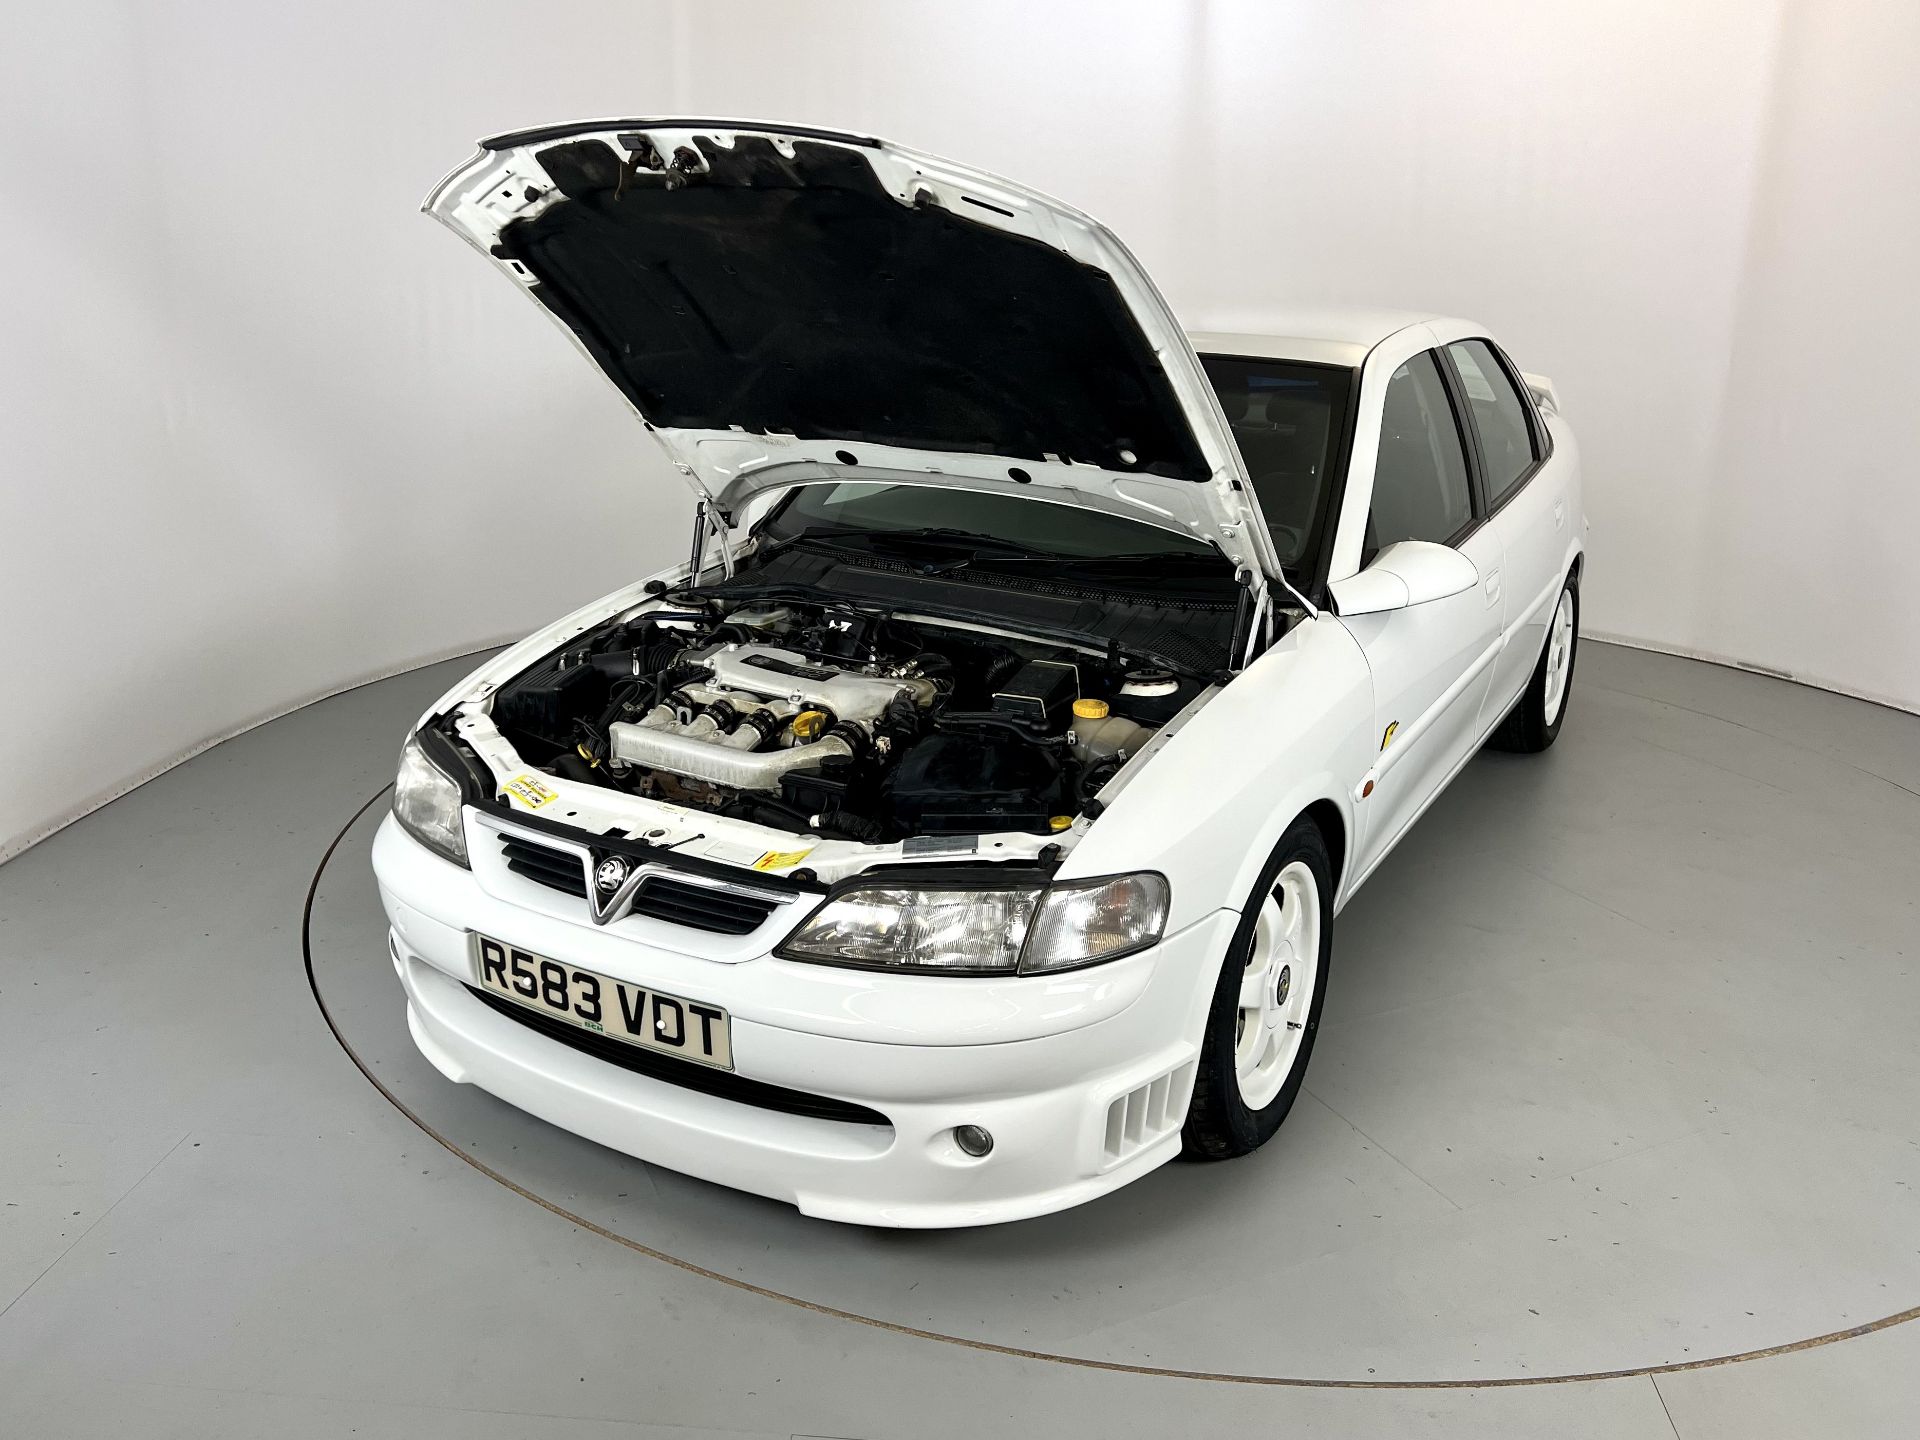 Vauxhall Vectra Supertouring - Image 35 of 36